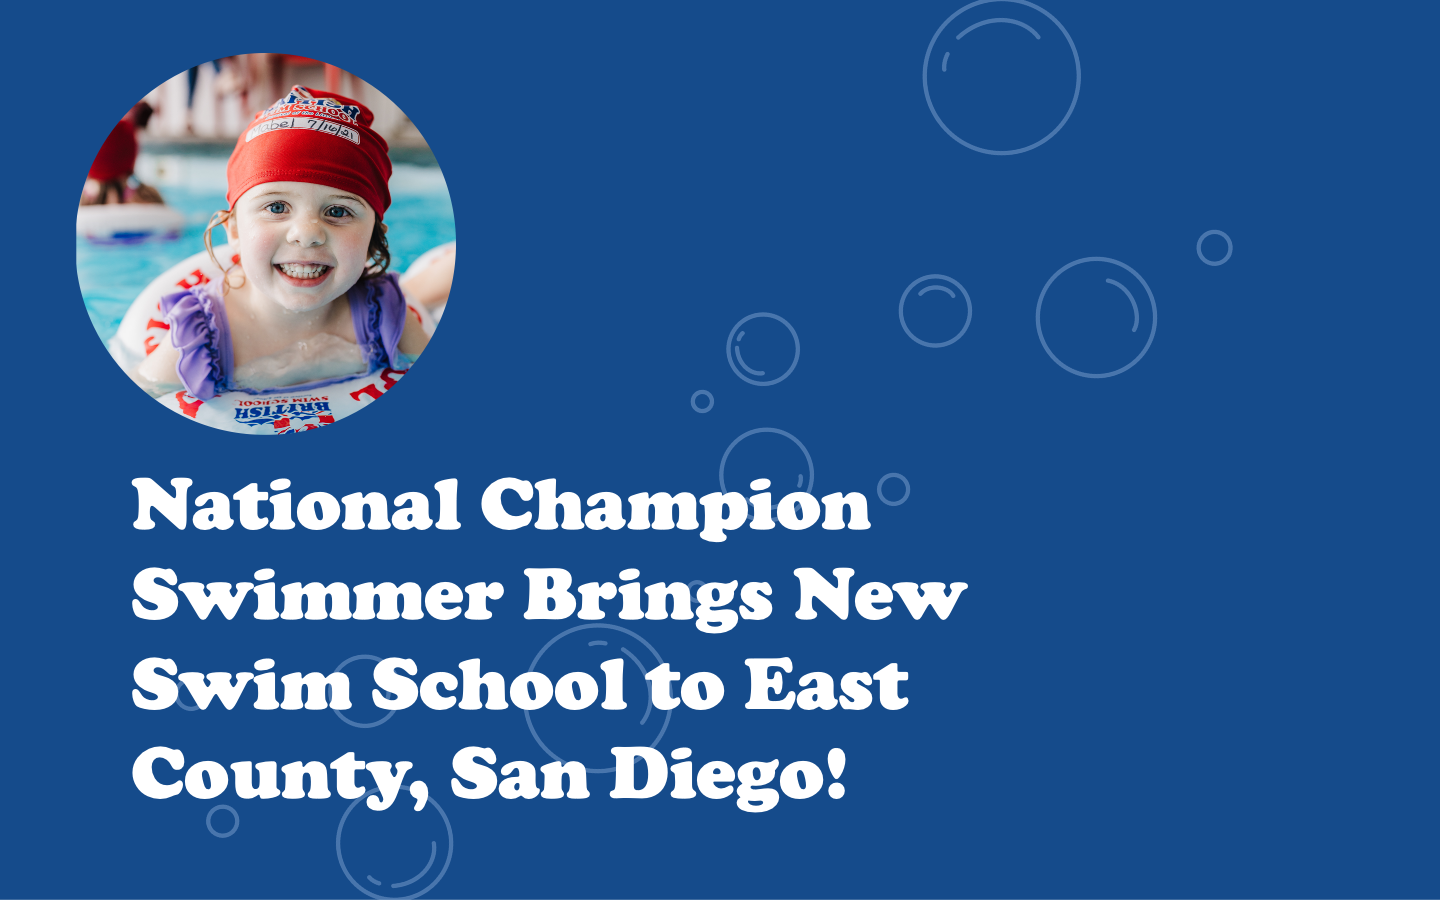 Image of National Champion Swimmer Brings New Swim School to East County, San Diego